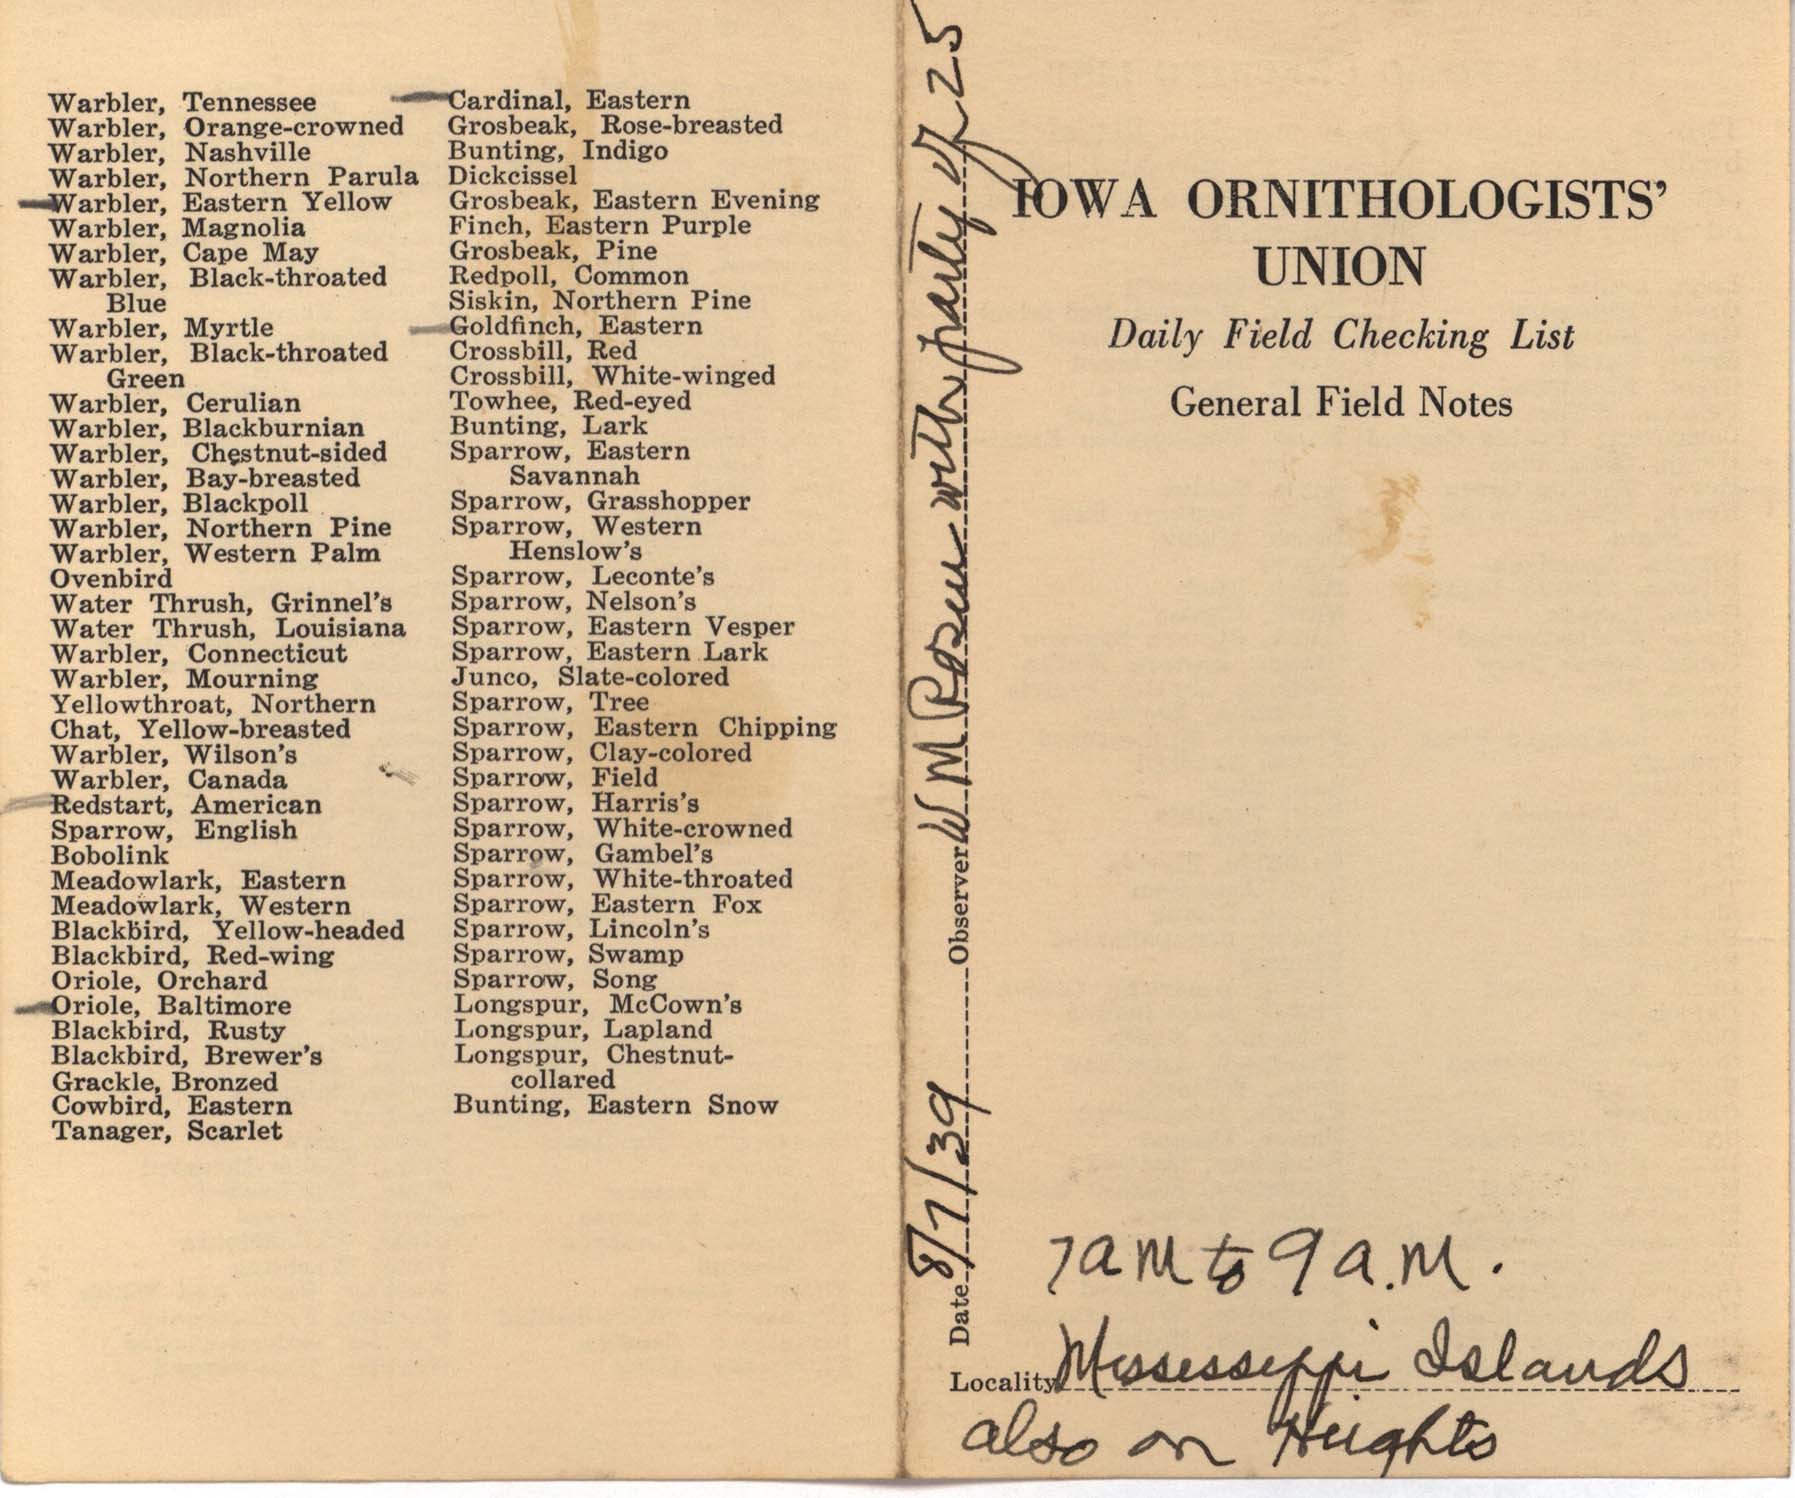 Daily field checking list by Walter Rosene, August 7, 1939